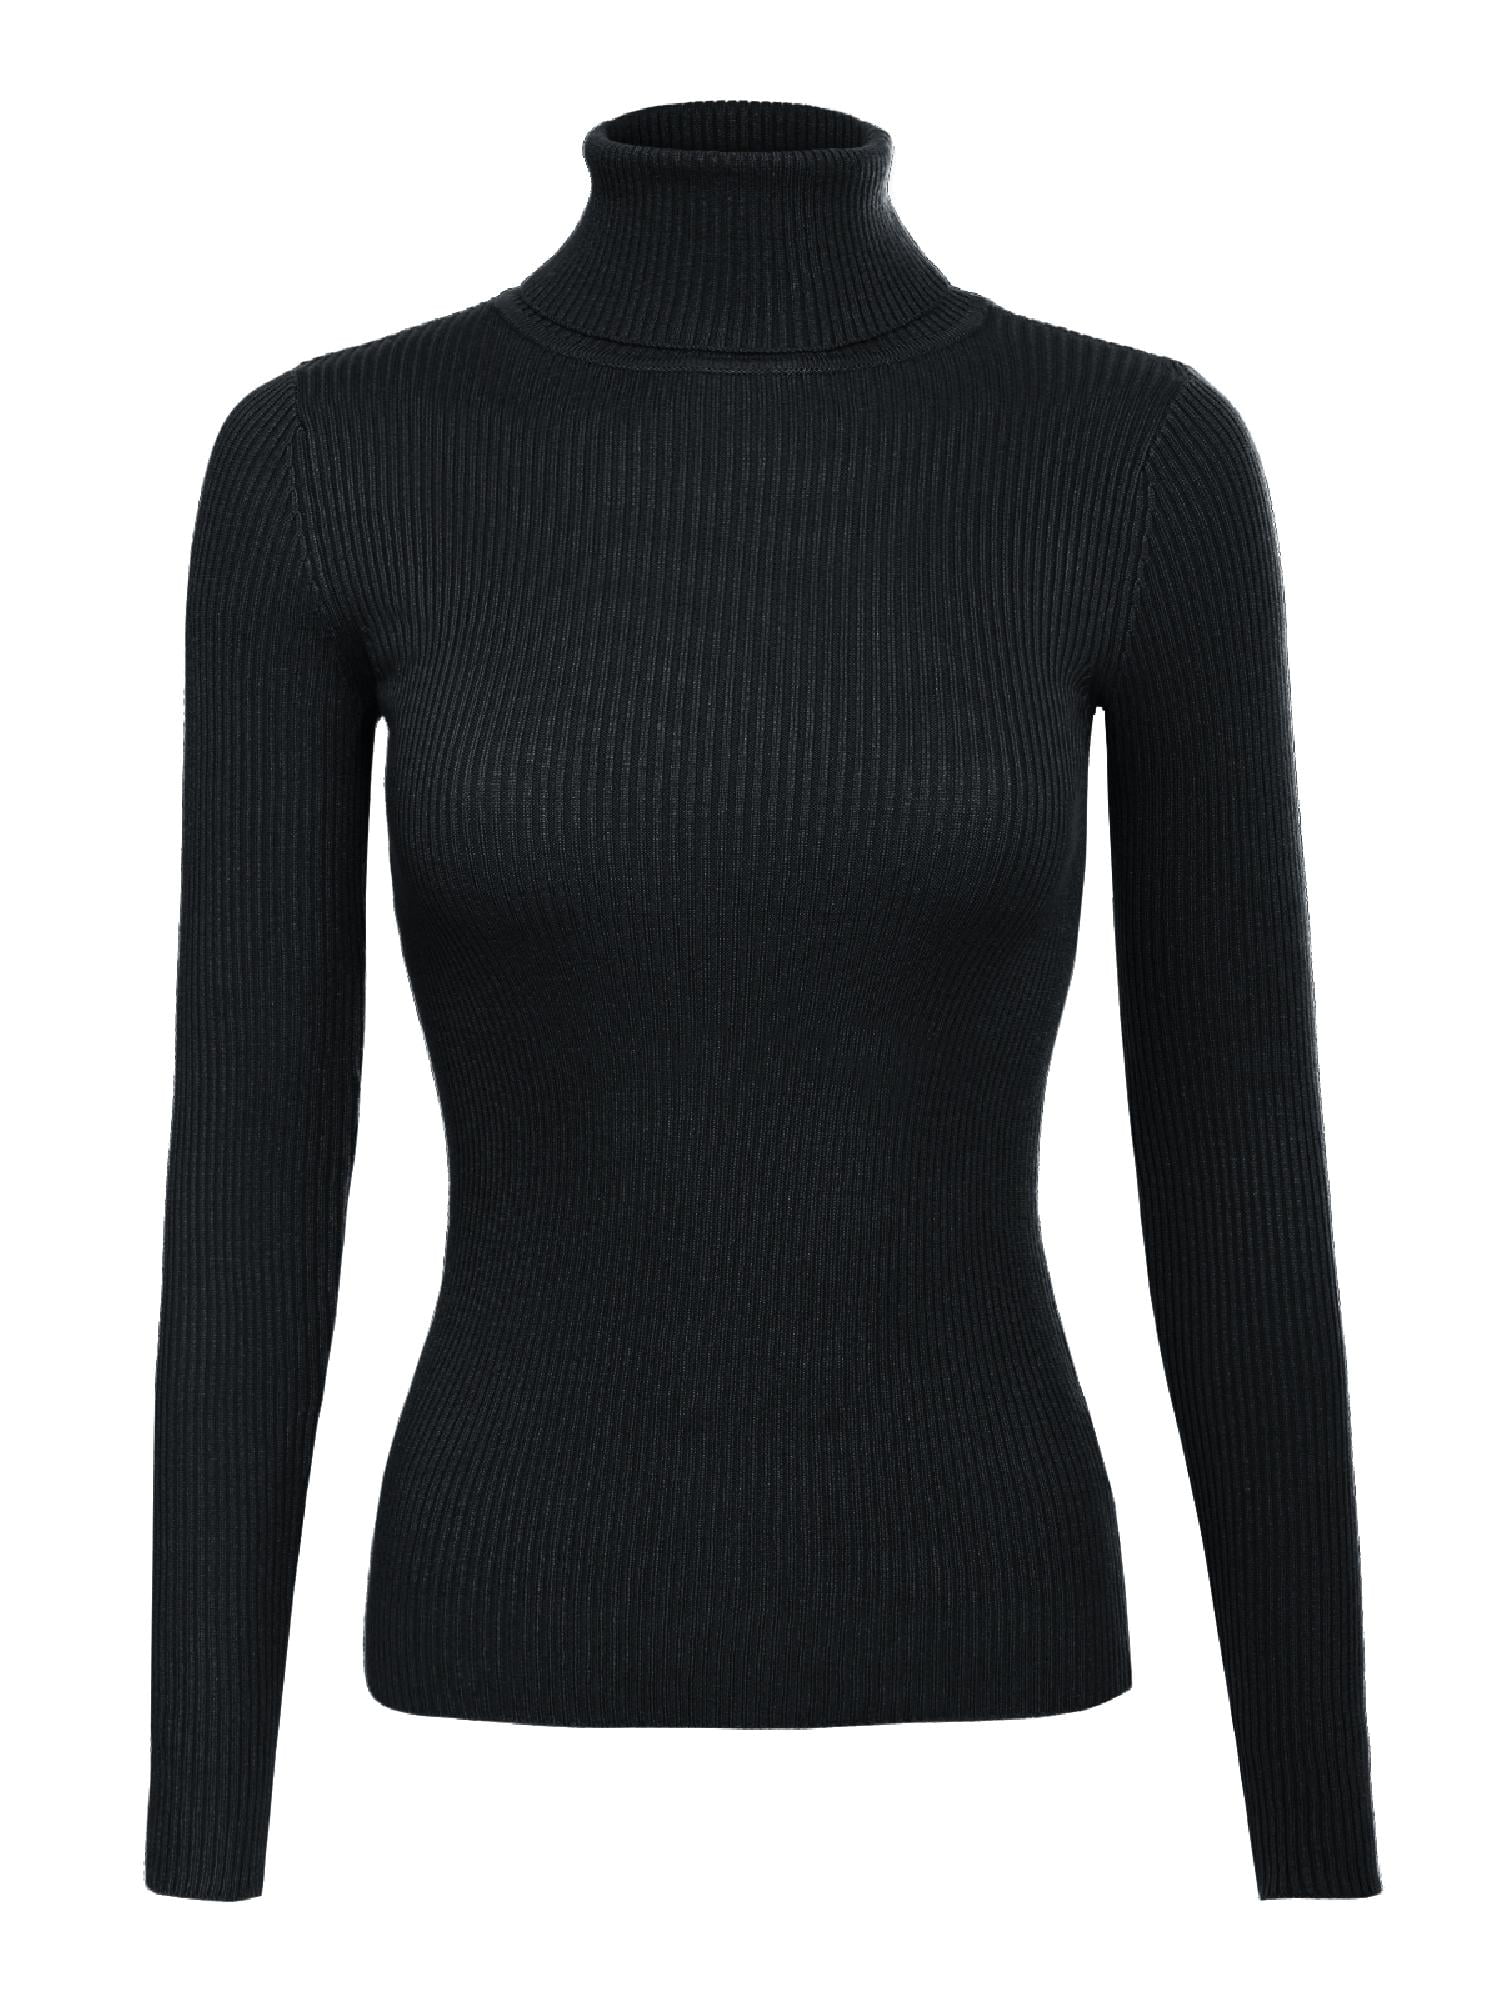 Made by Olivia Women's Solid Long Sleeve Turtleneck Slim Fit Ultra ...